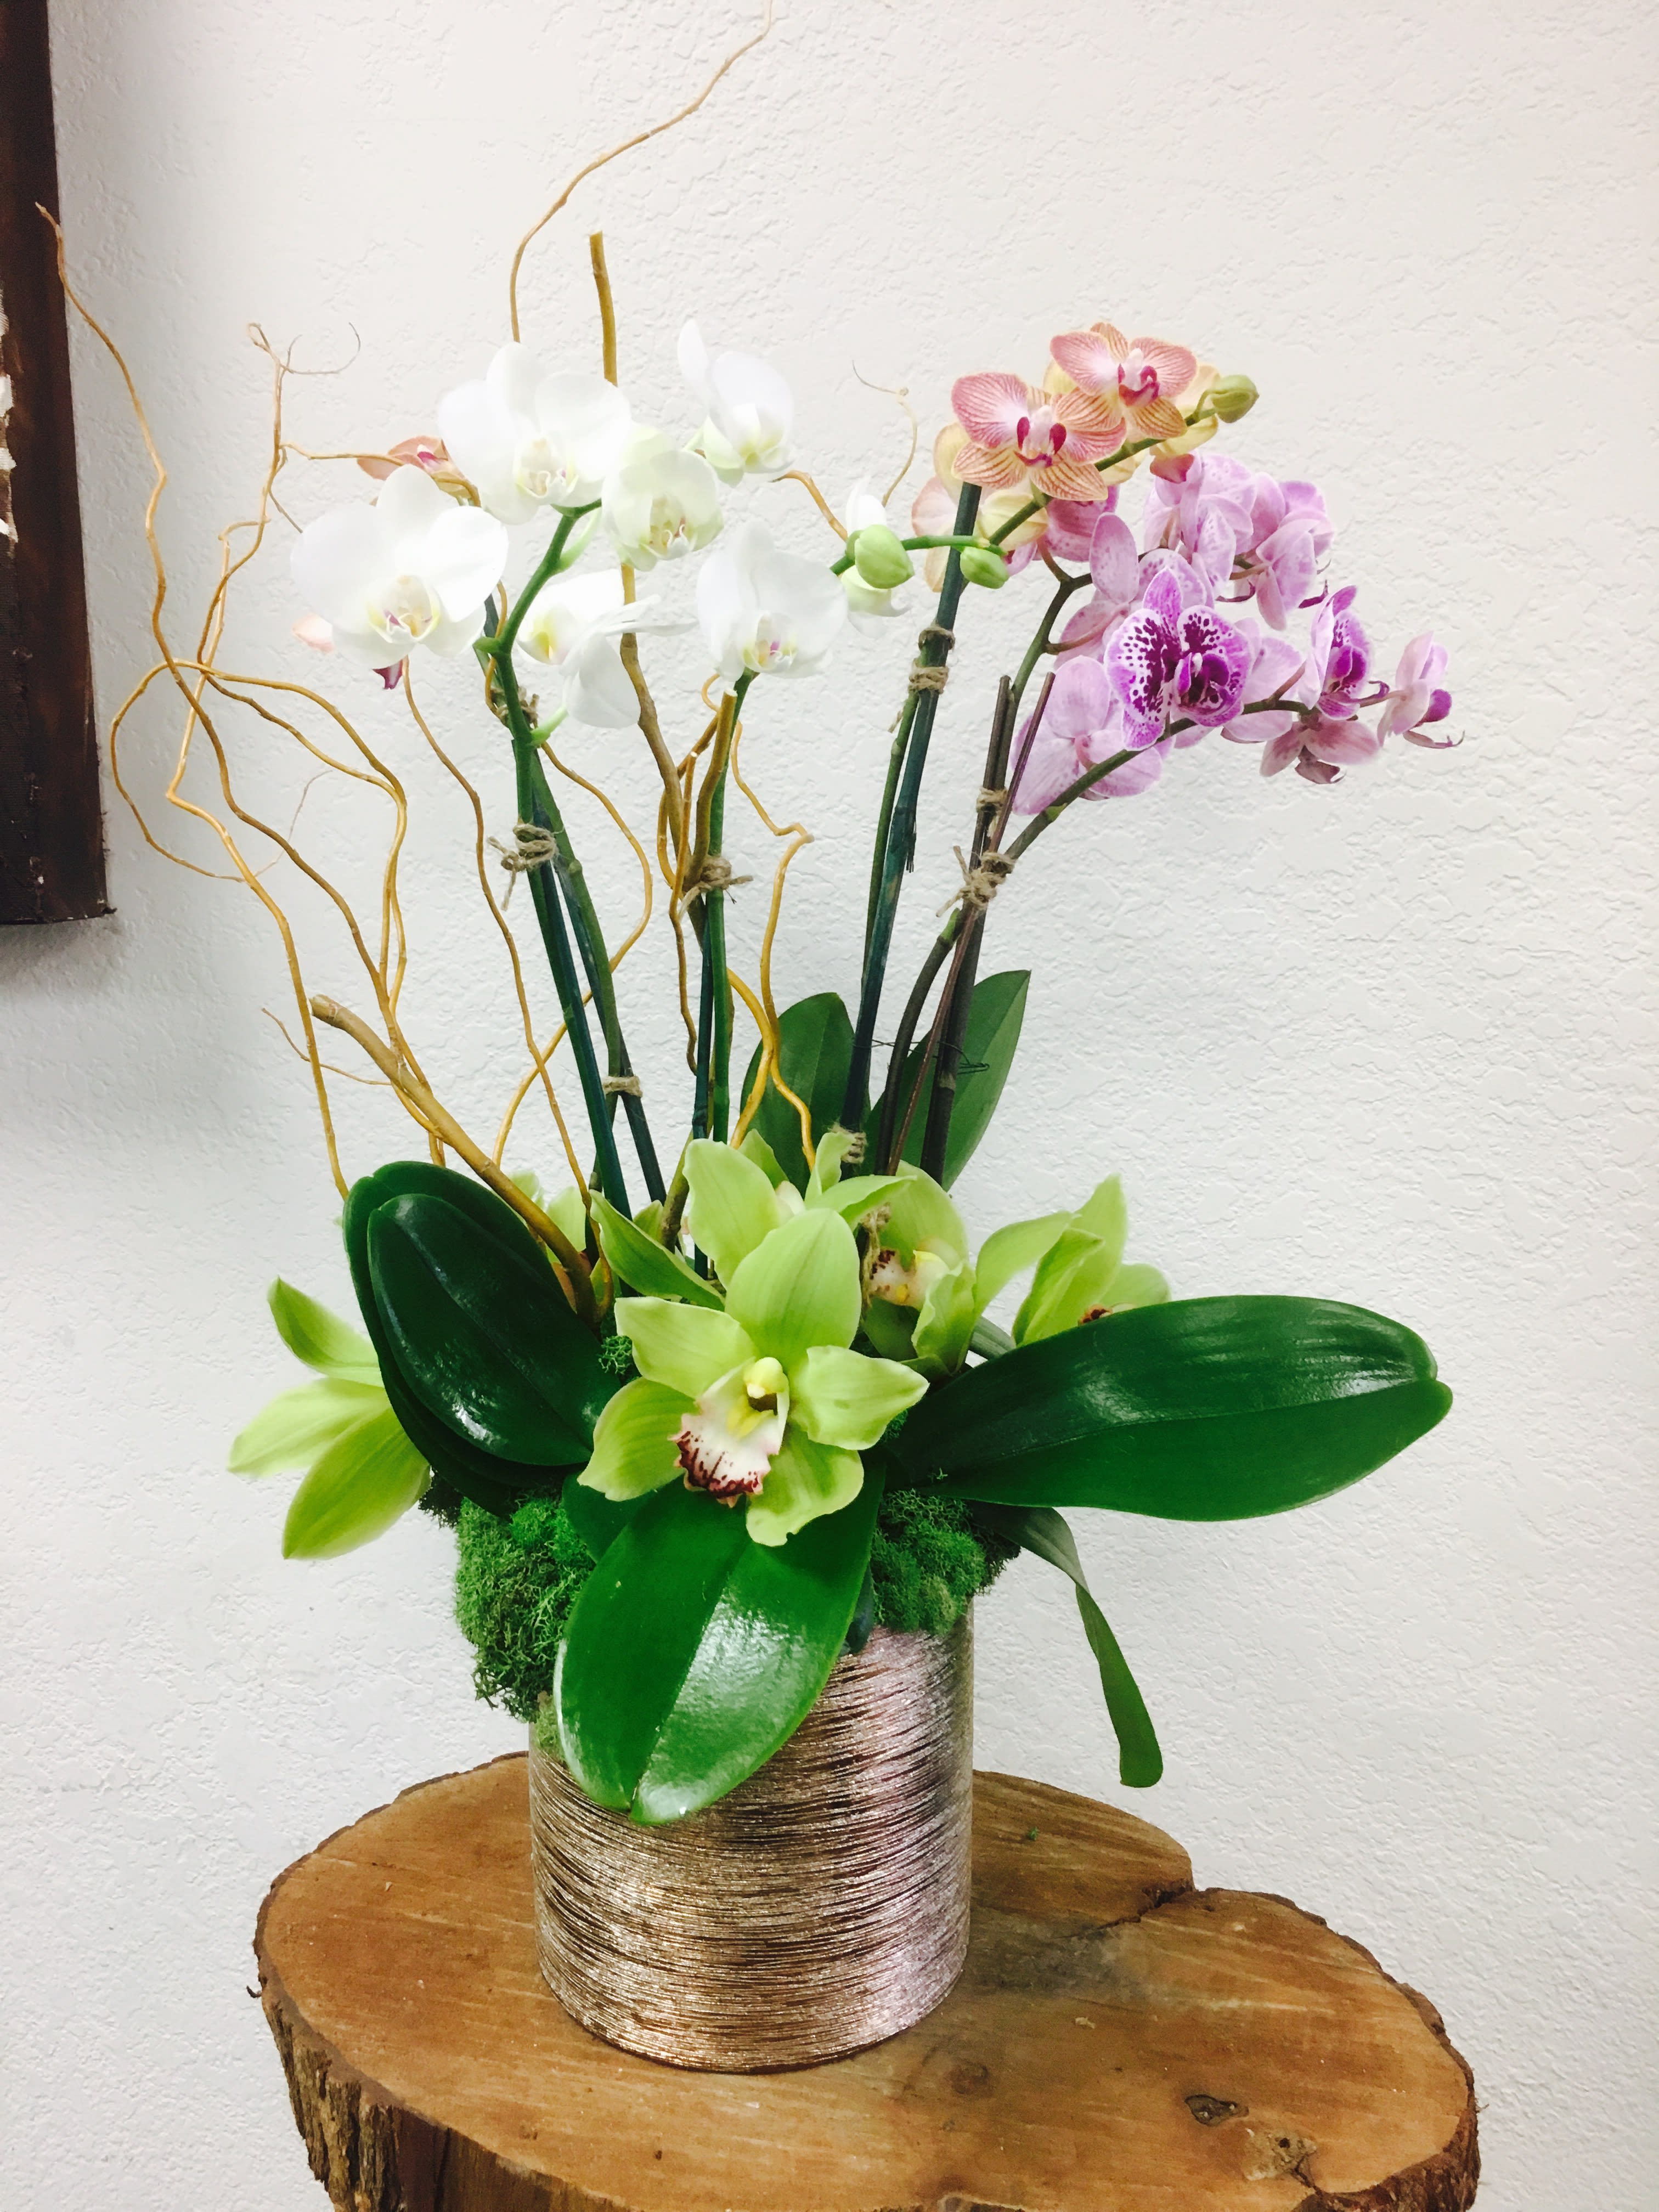 Mini Orchid Plant Arrangement By Natural Simplicity,Green Onion Vs Chives